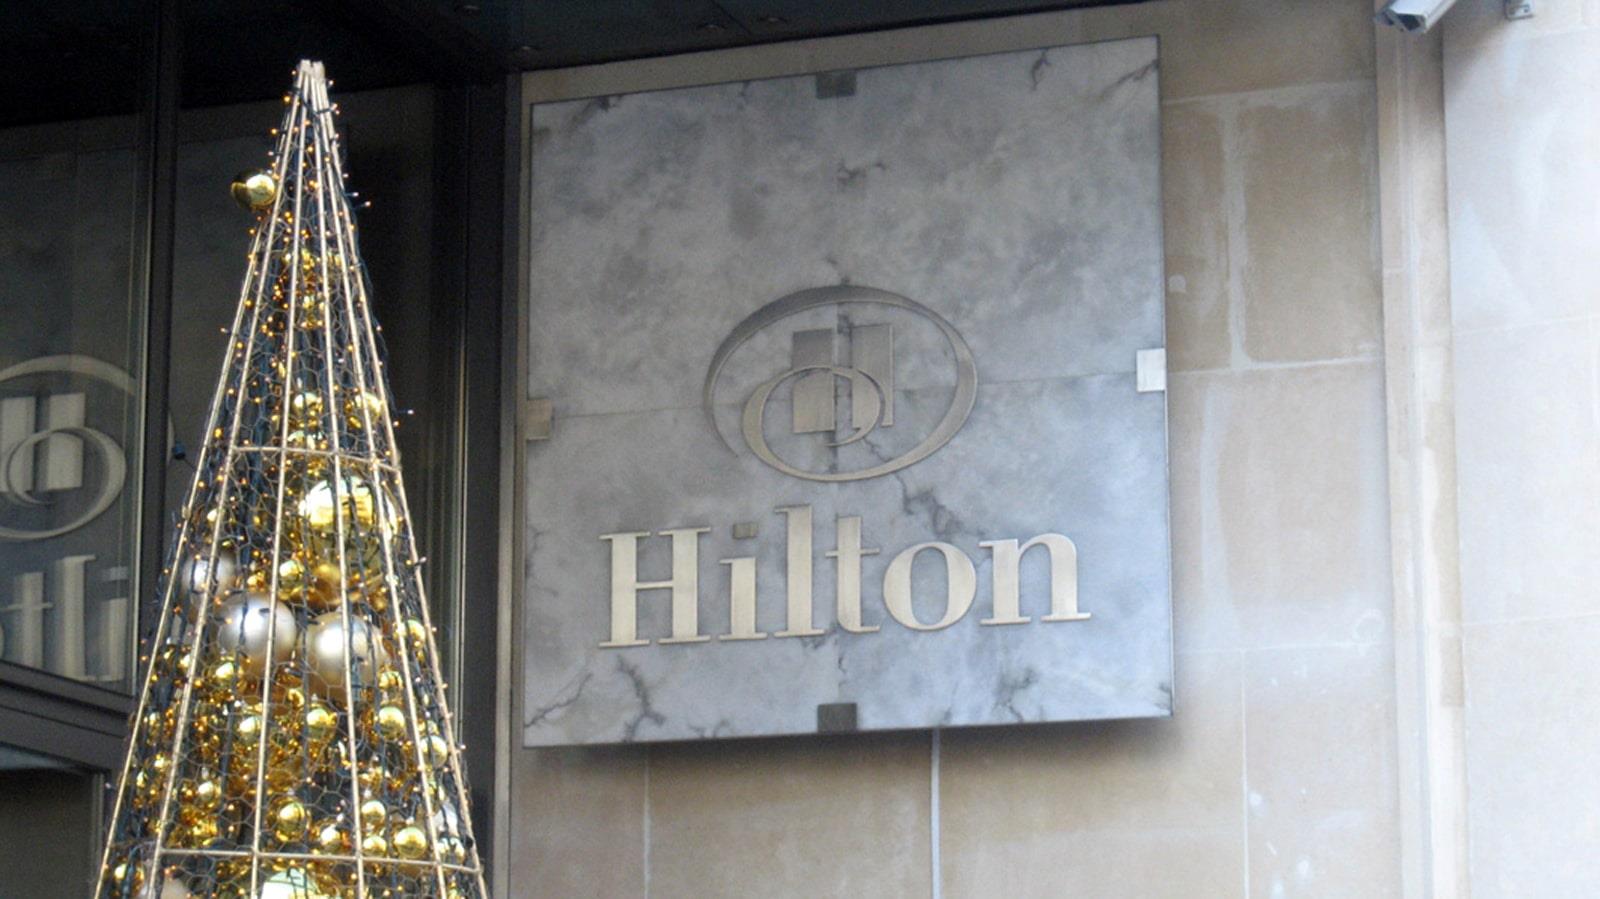 Christmas tree decorated with golden balls at Hilton Hotel entrance